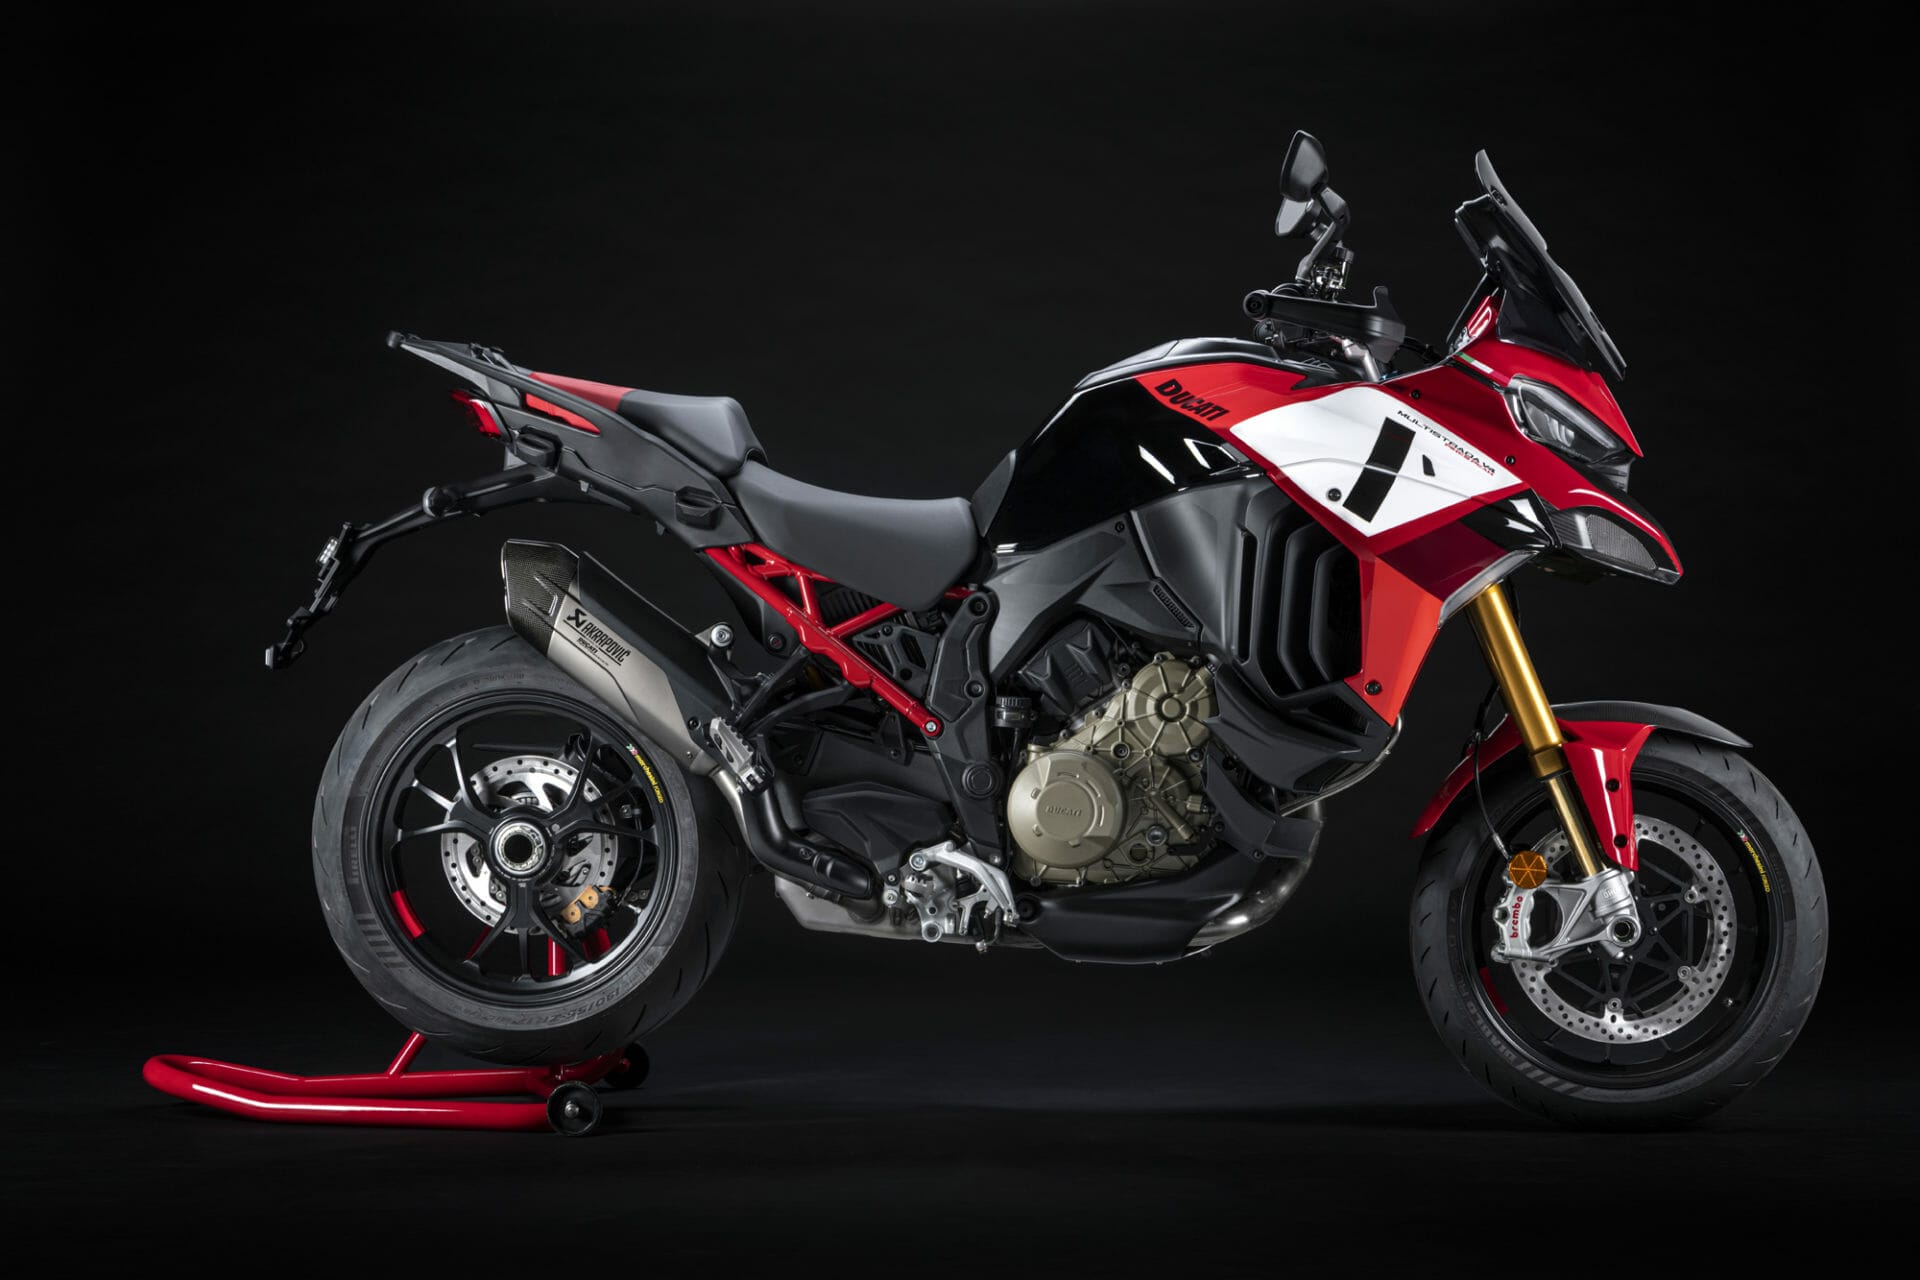 Ducati Multistrada V4 Pikes Peak
- also in the MOTORCYCLES.NEWS APP